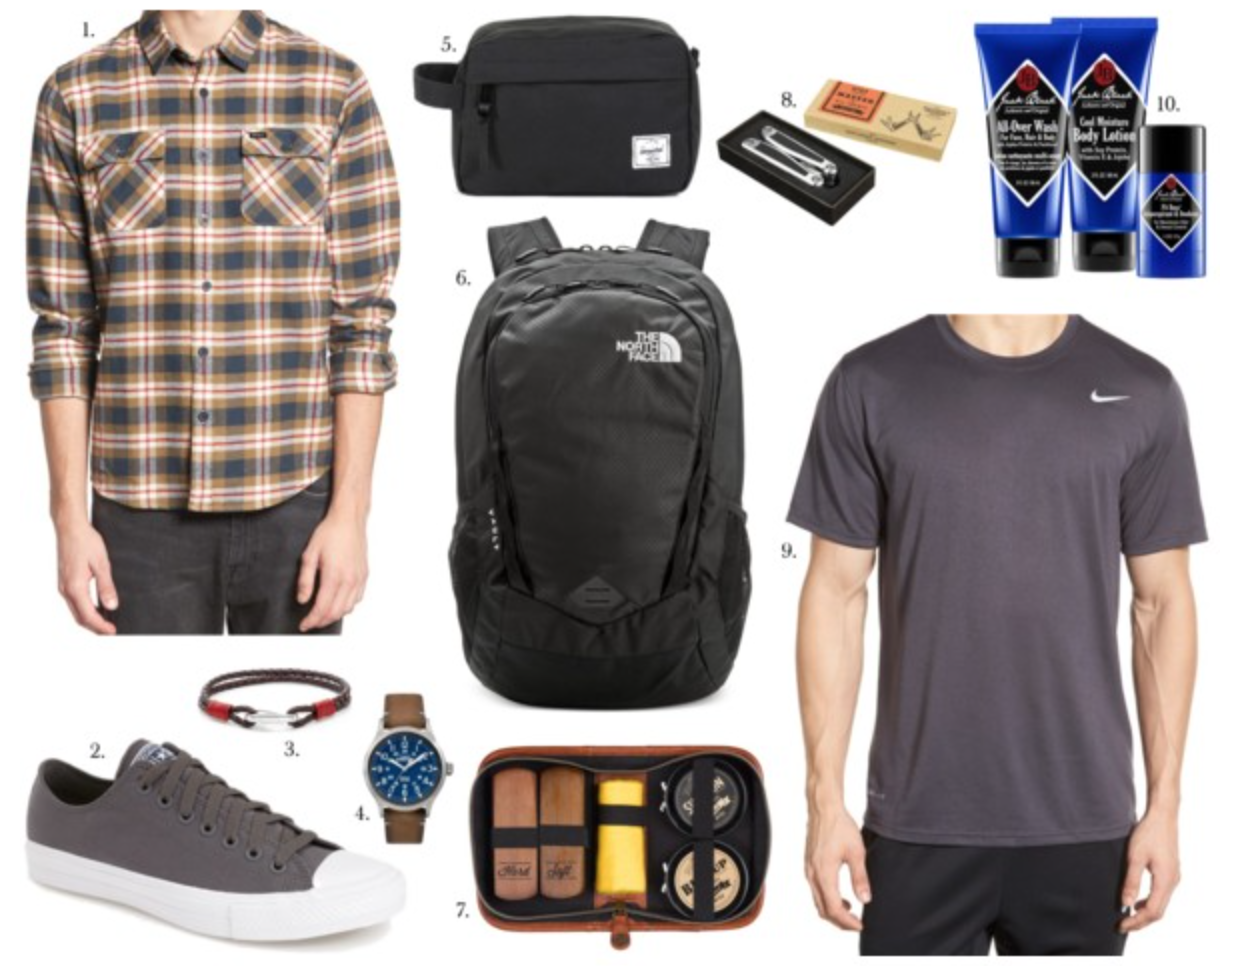 gifts for him under $50 2016